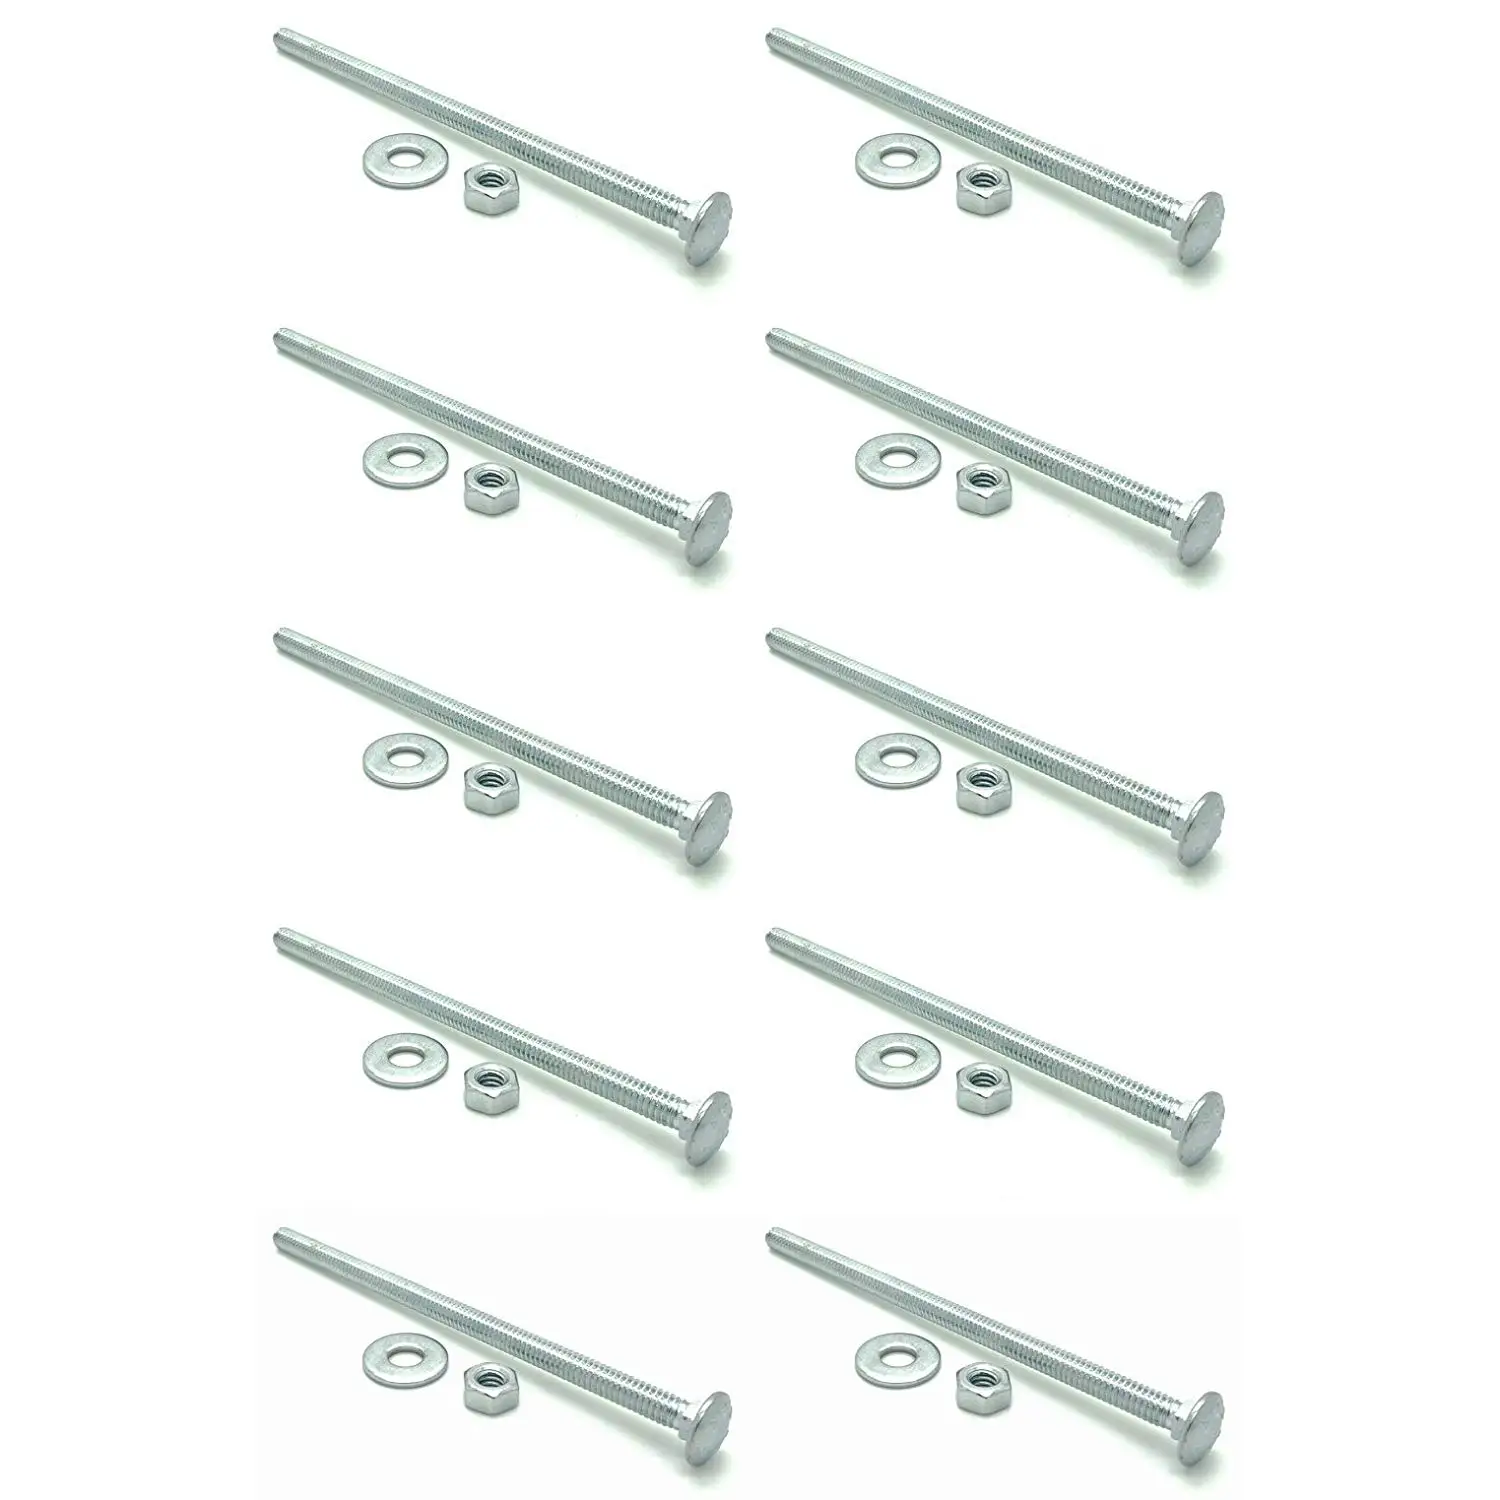 6,000 Lb. Capacity and Heavy Backer Plates Including Mounting Hardware Recessed Pan D-Ring Trailer Tie Downs 4-Pack Complete Set: 16 Carriage Bolts, Washers and Nylon Lock Nuts